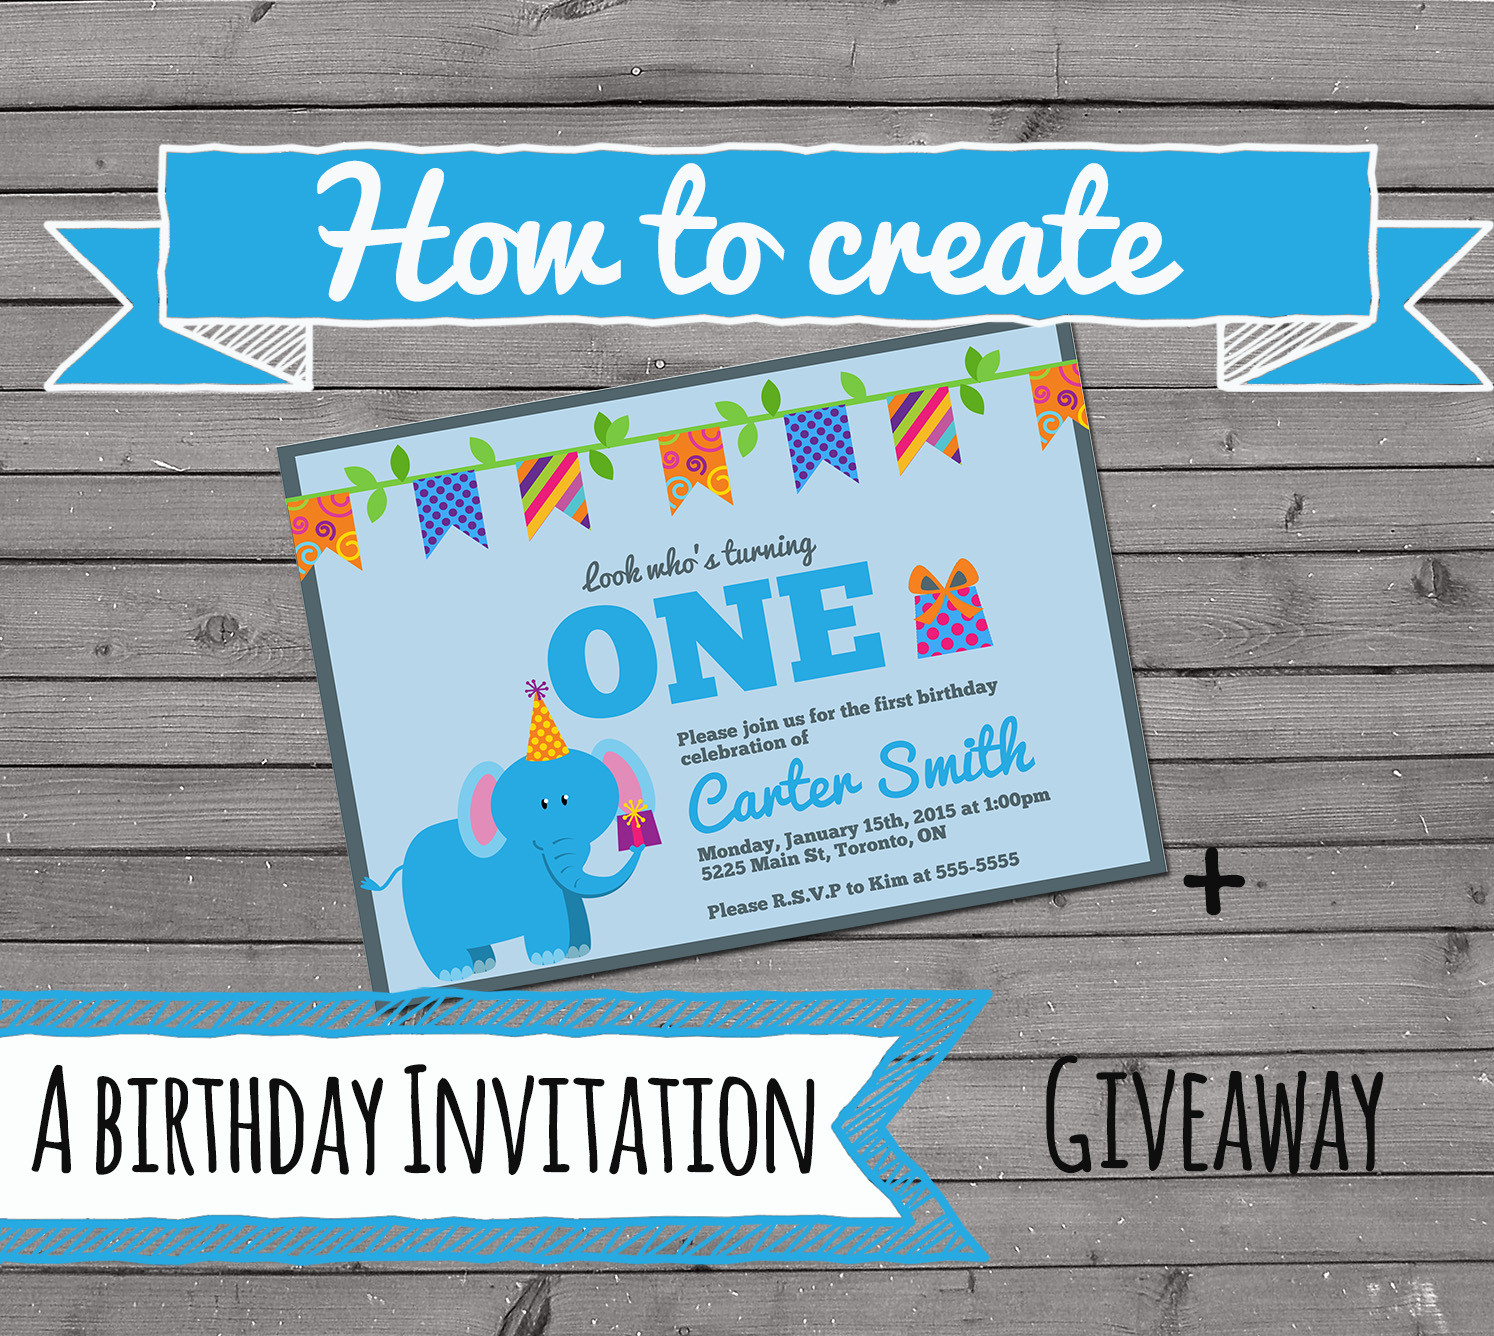 Create Birthday Party Invitations
 How to Create an Invitation The Best Ideas for Kids